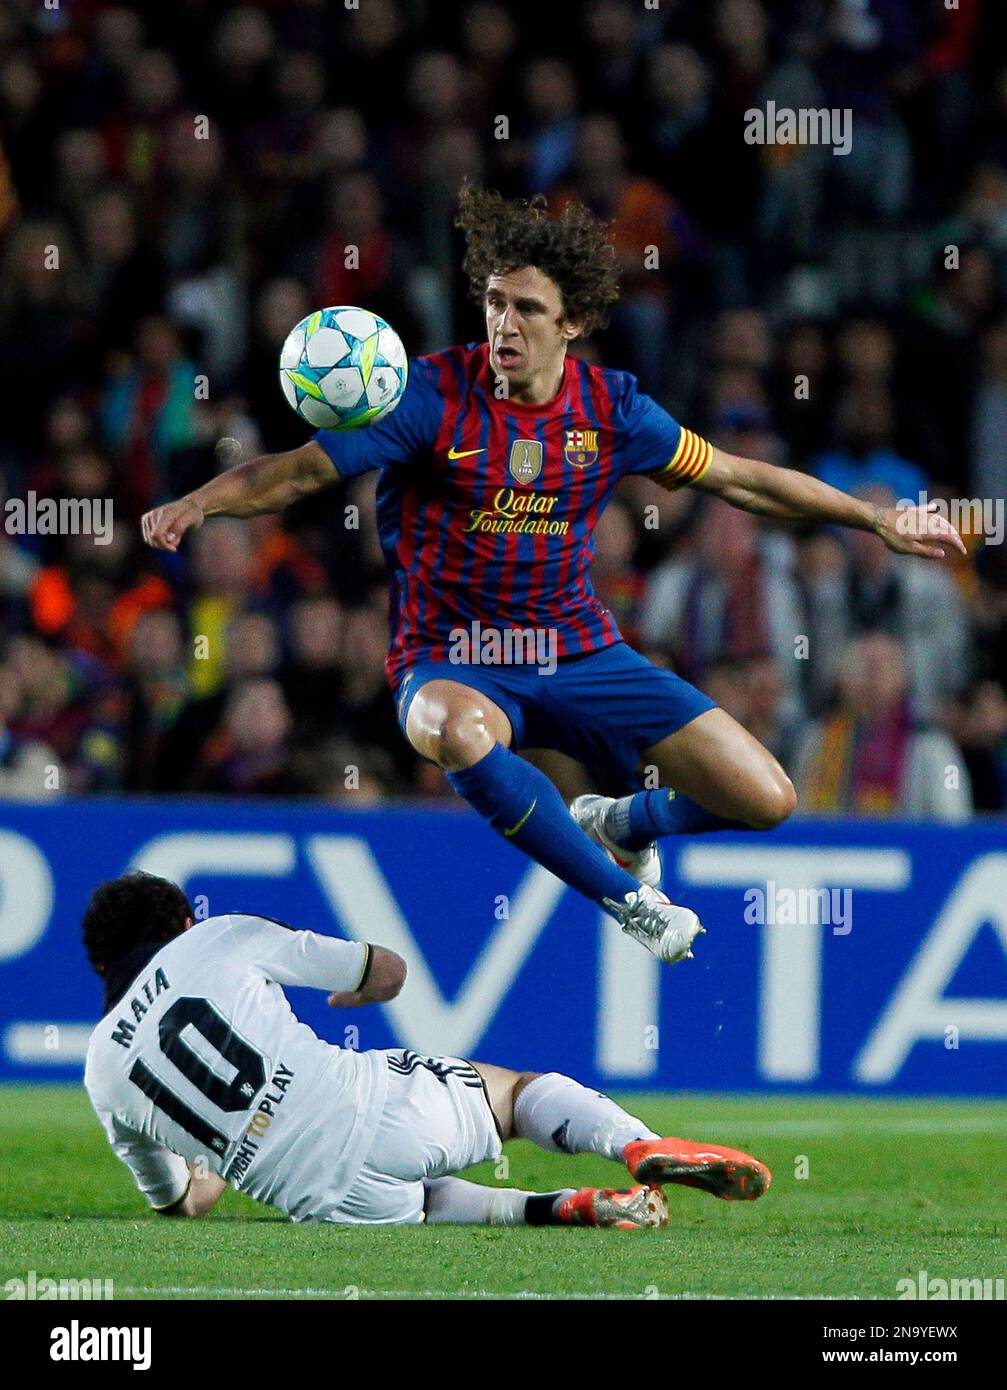 Chelsea's Juan Mata from Spain, bottom, vies for the ball with Barcelona's  Carles Puyol during a Champions League second leg semifinal soccer match at  Camp Nou stadium, in Barcelona, Spain, Tuesday, April